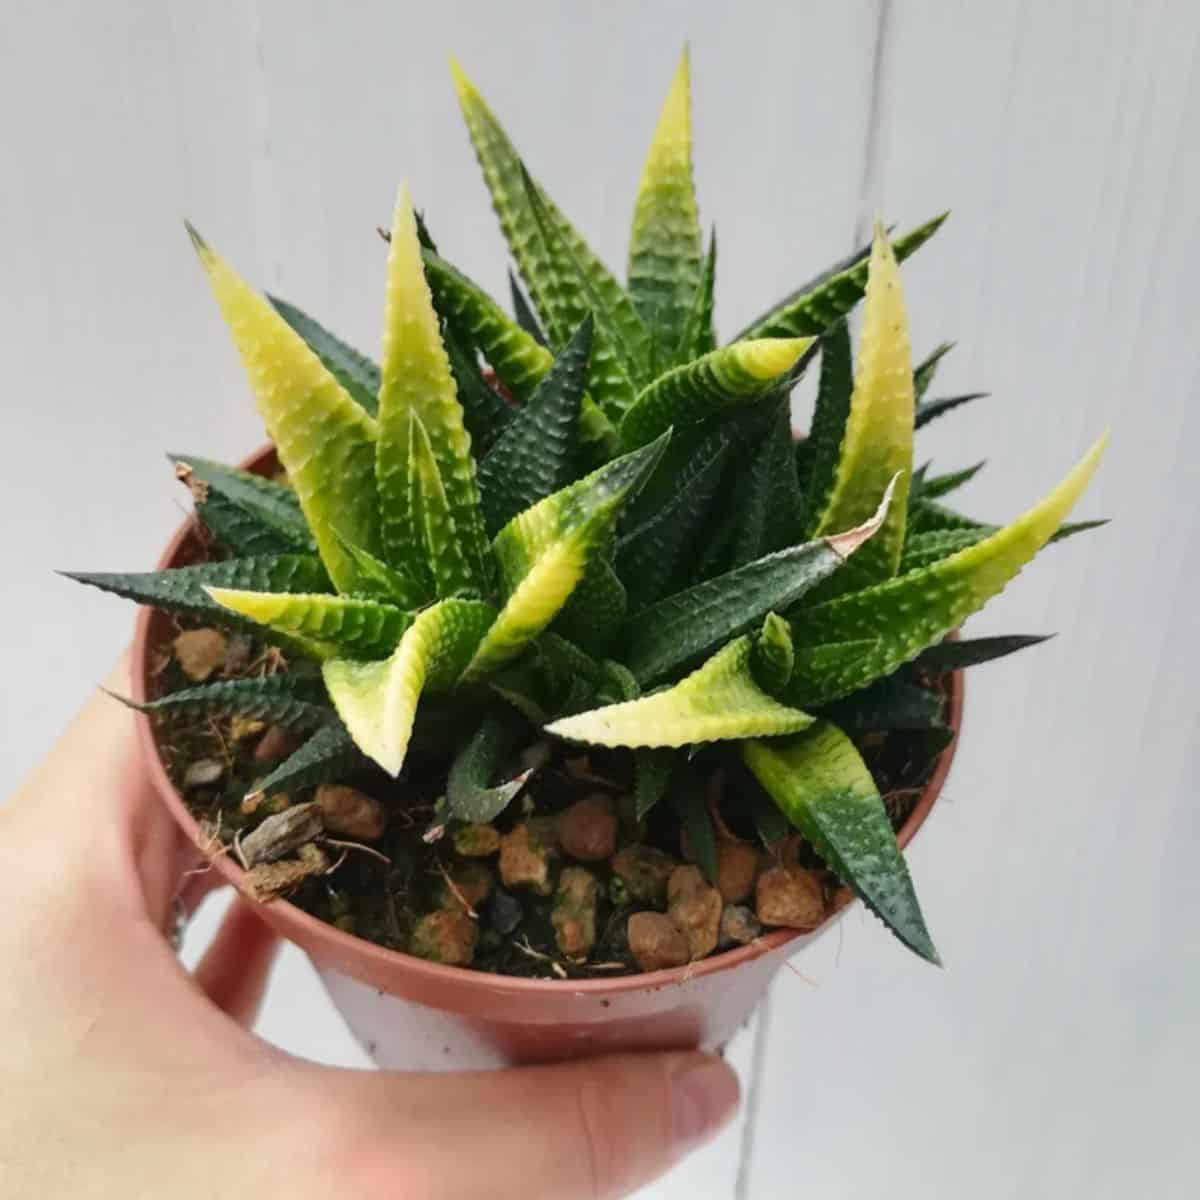 Haworthia limifolia, Variegated grows in a pot.